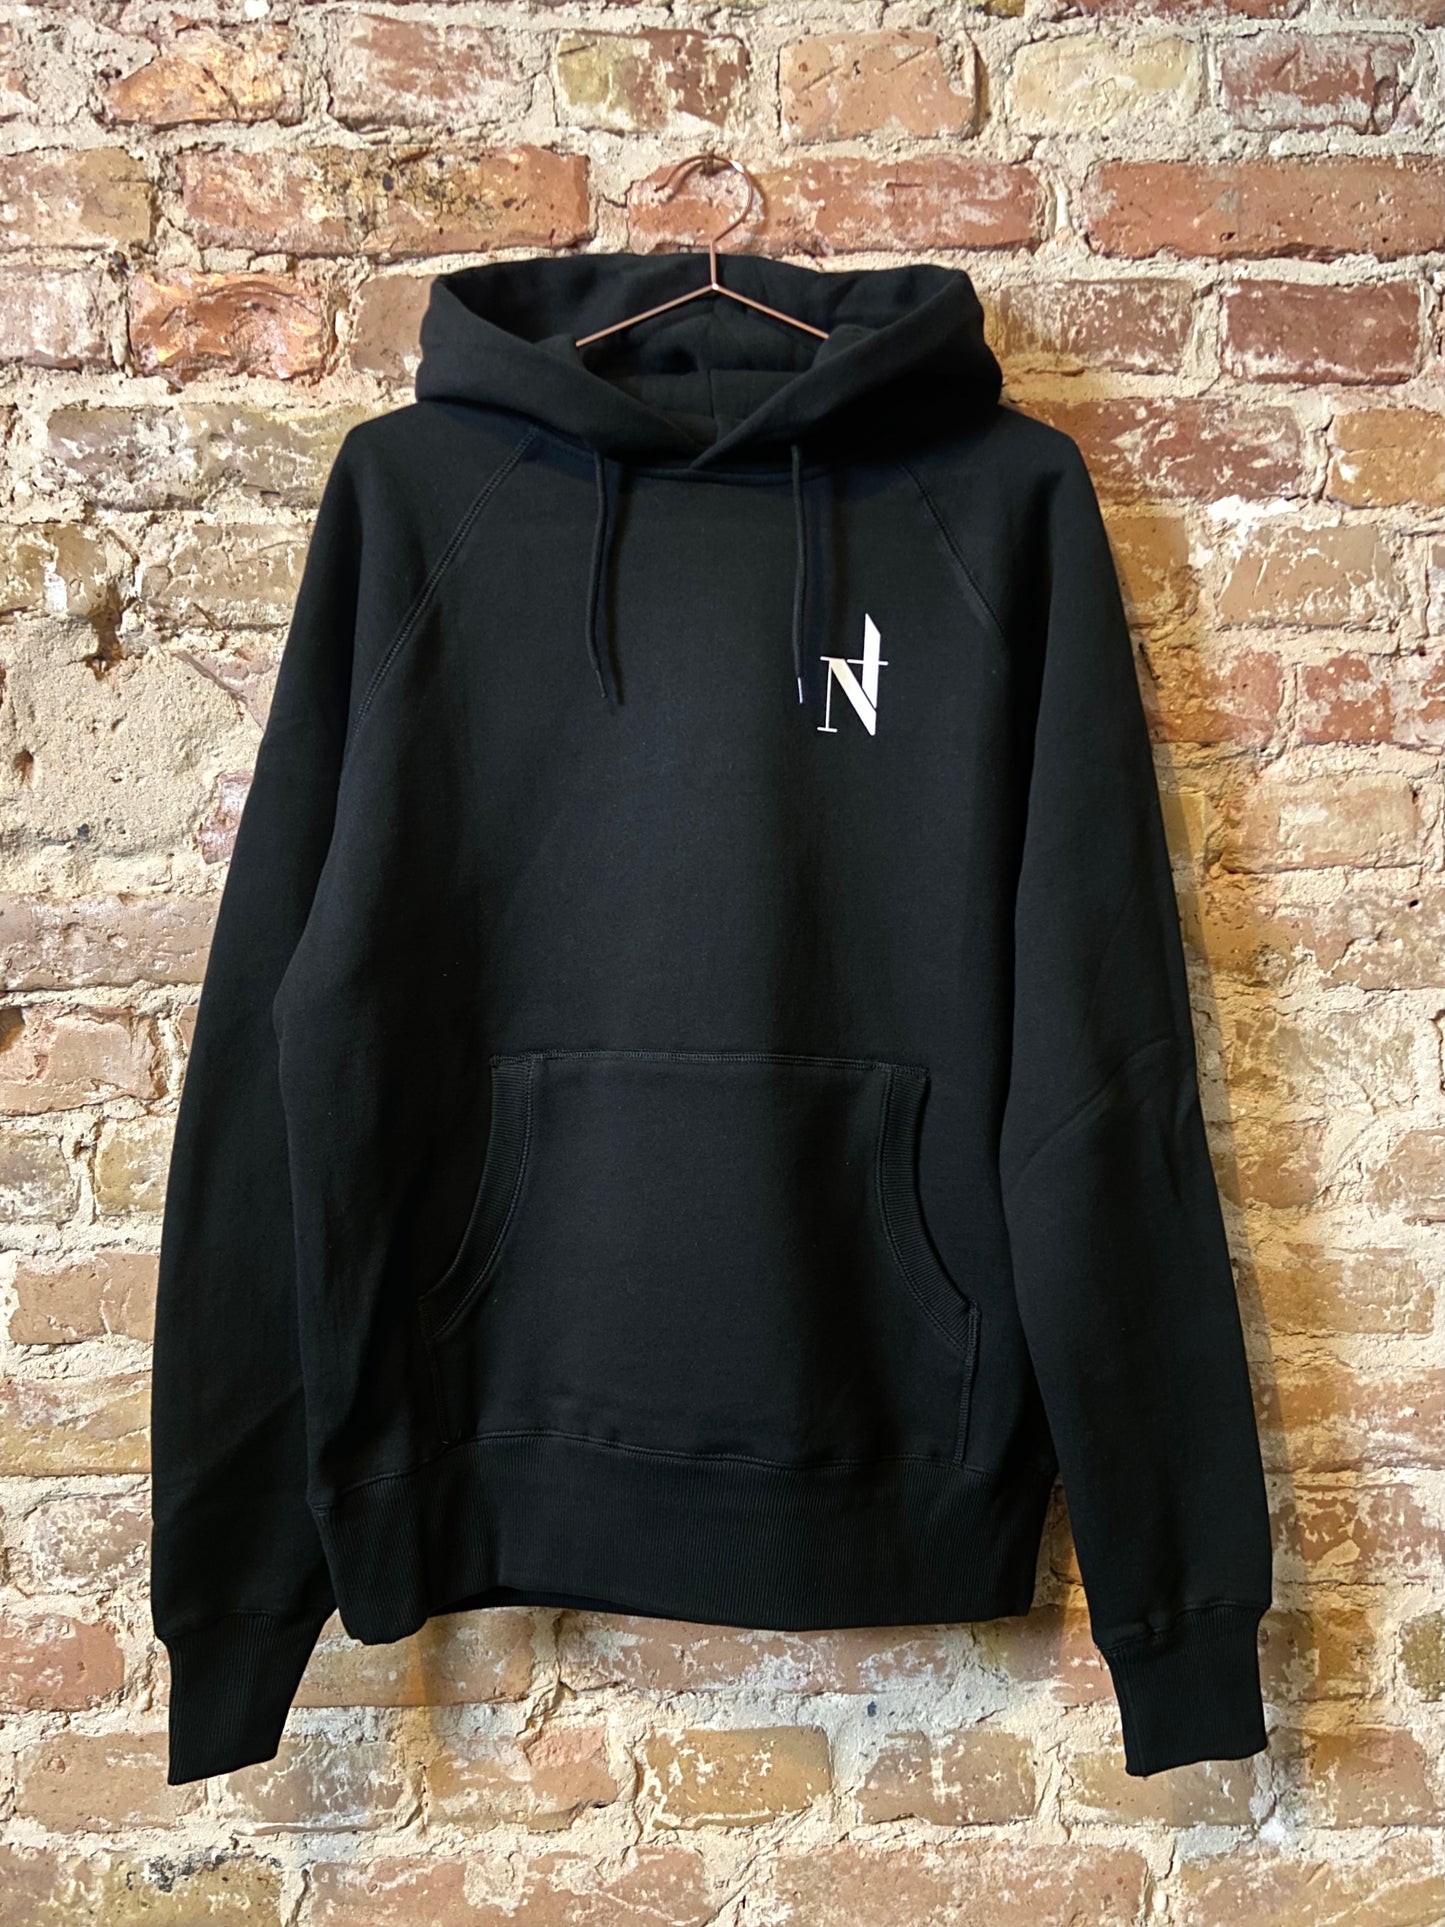 NT VALUES Hoodie Limited Edition